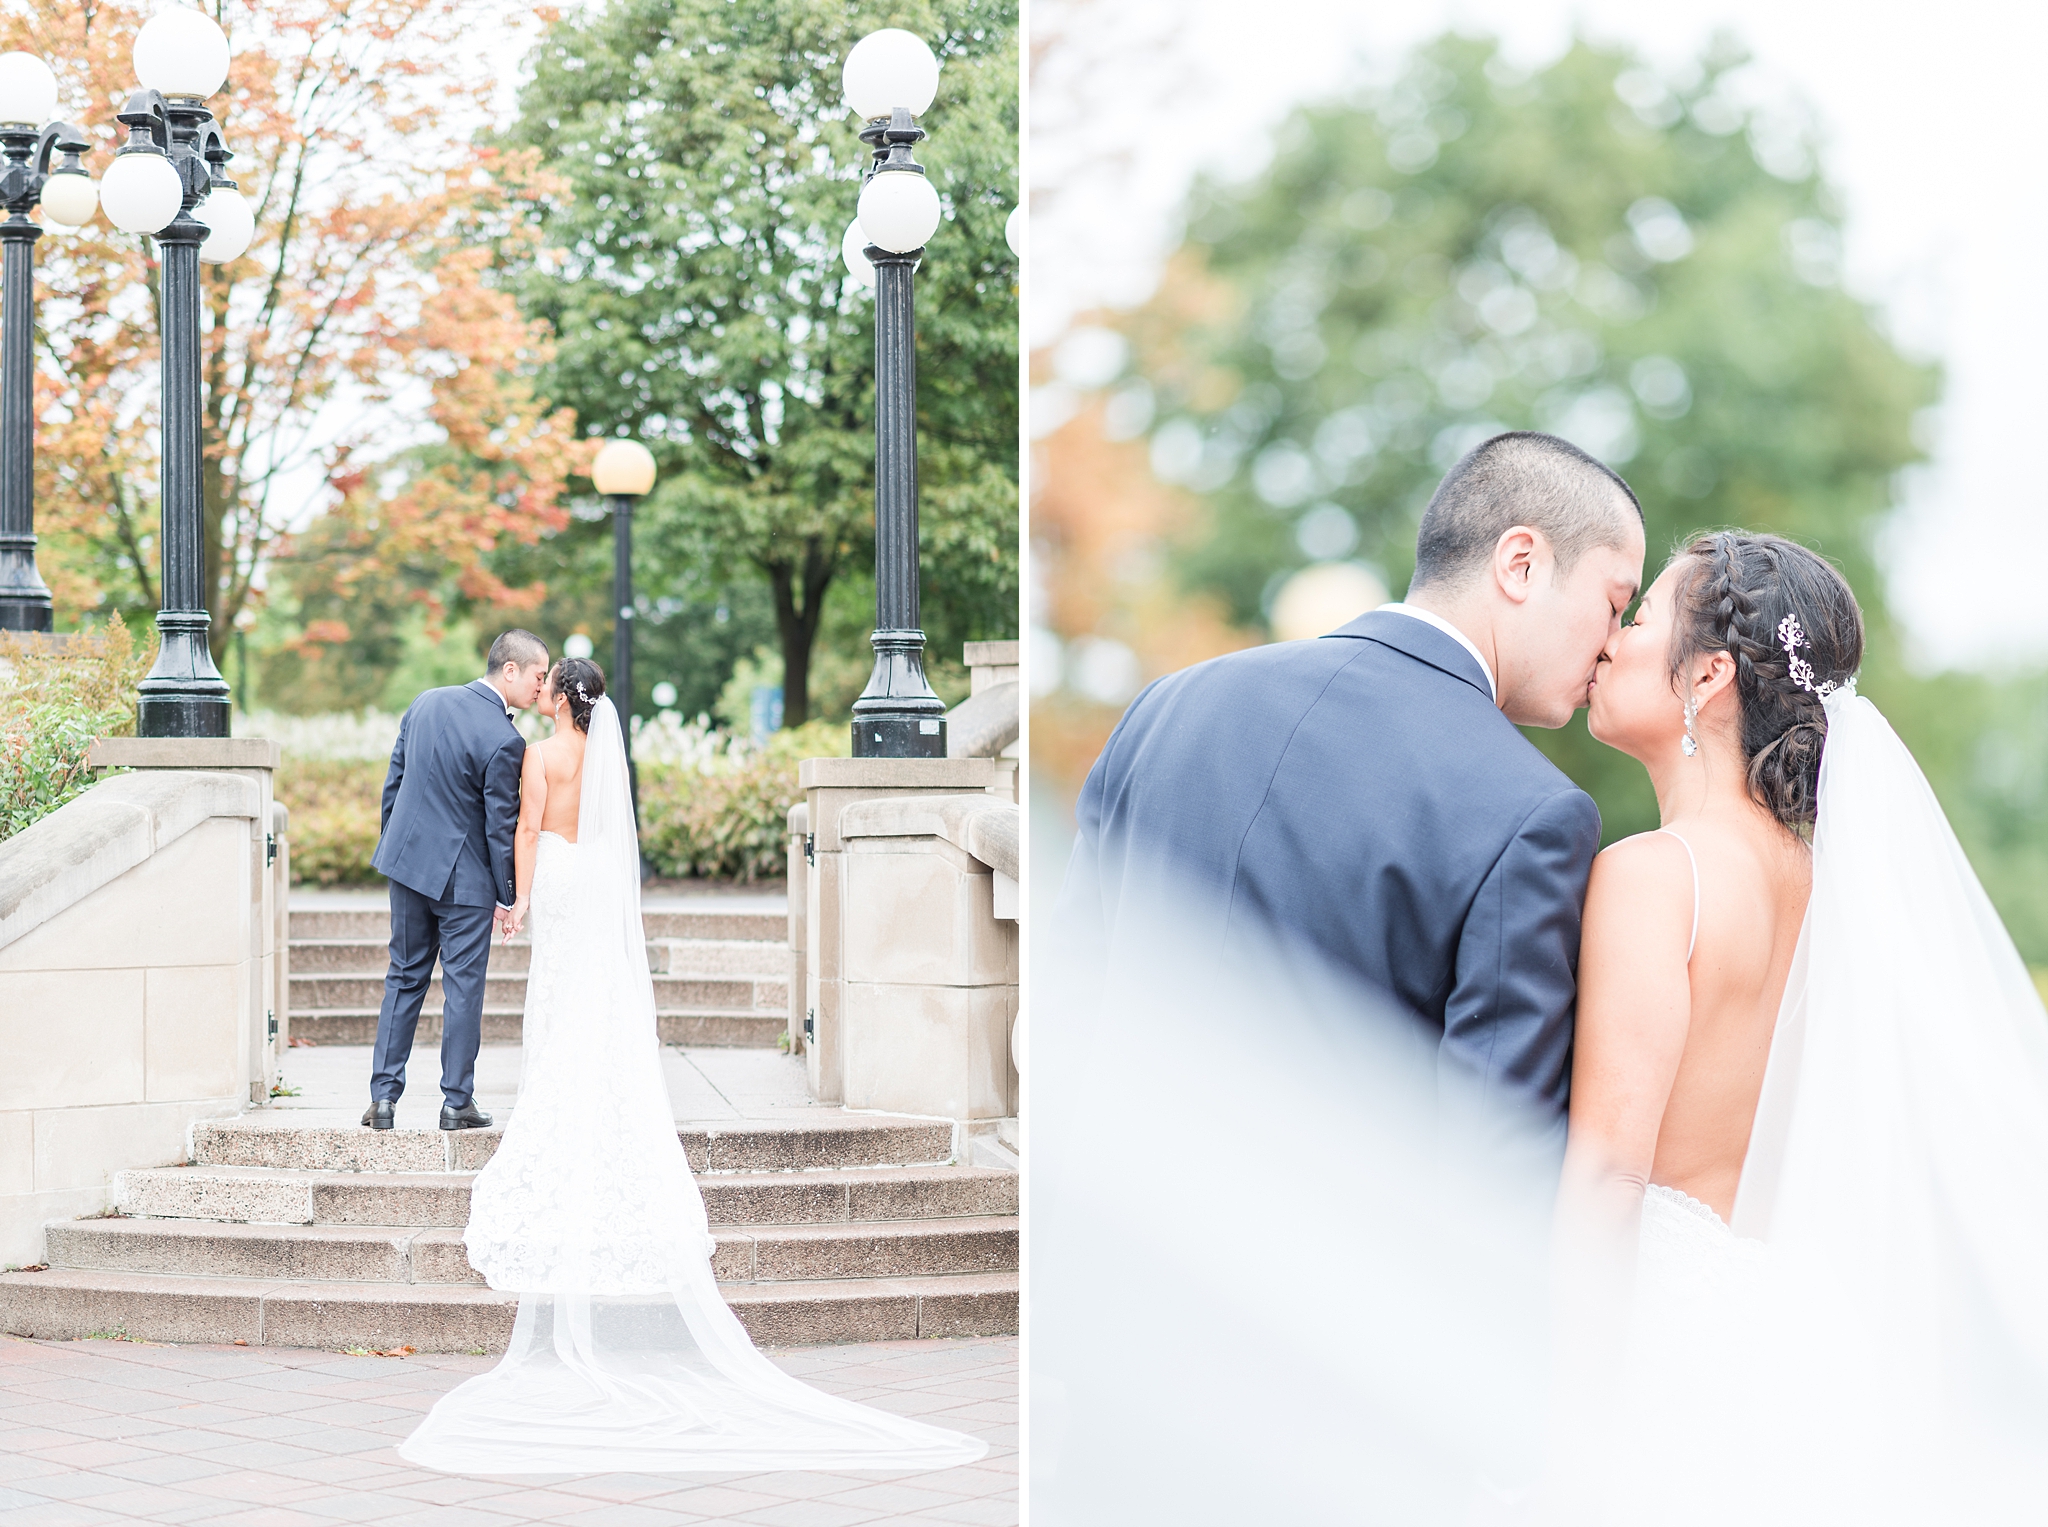 Autumn bold, colourful wedding at twentytwo | ottawa wedding | wedding photos at the westin ottawa downtown get more inspiration from this bright autumn wedding. #ottawawedding #weddingphotography #ottawaweddings